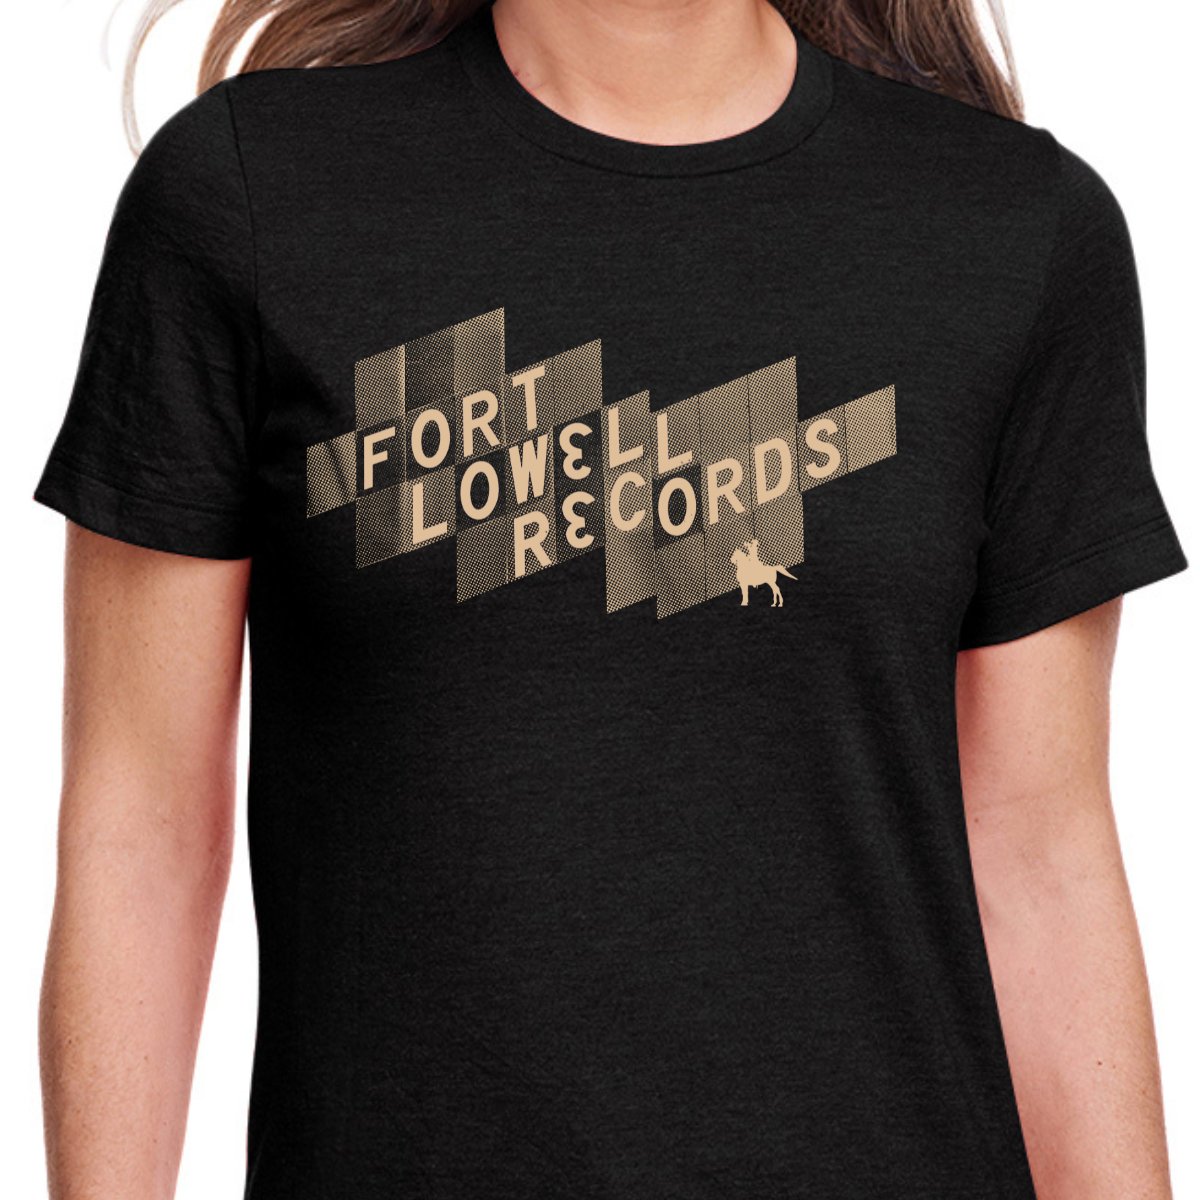 NEW T-SHIRTS, available now: fortlowell.square.site/product/t-shir…